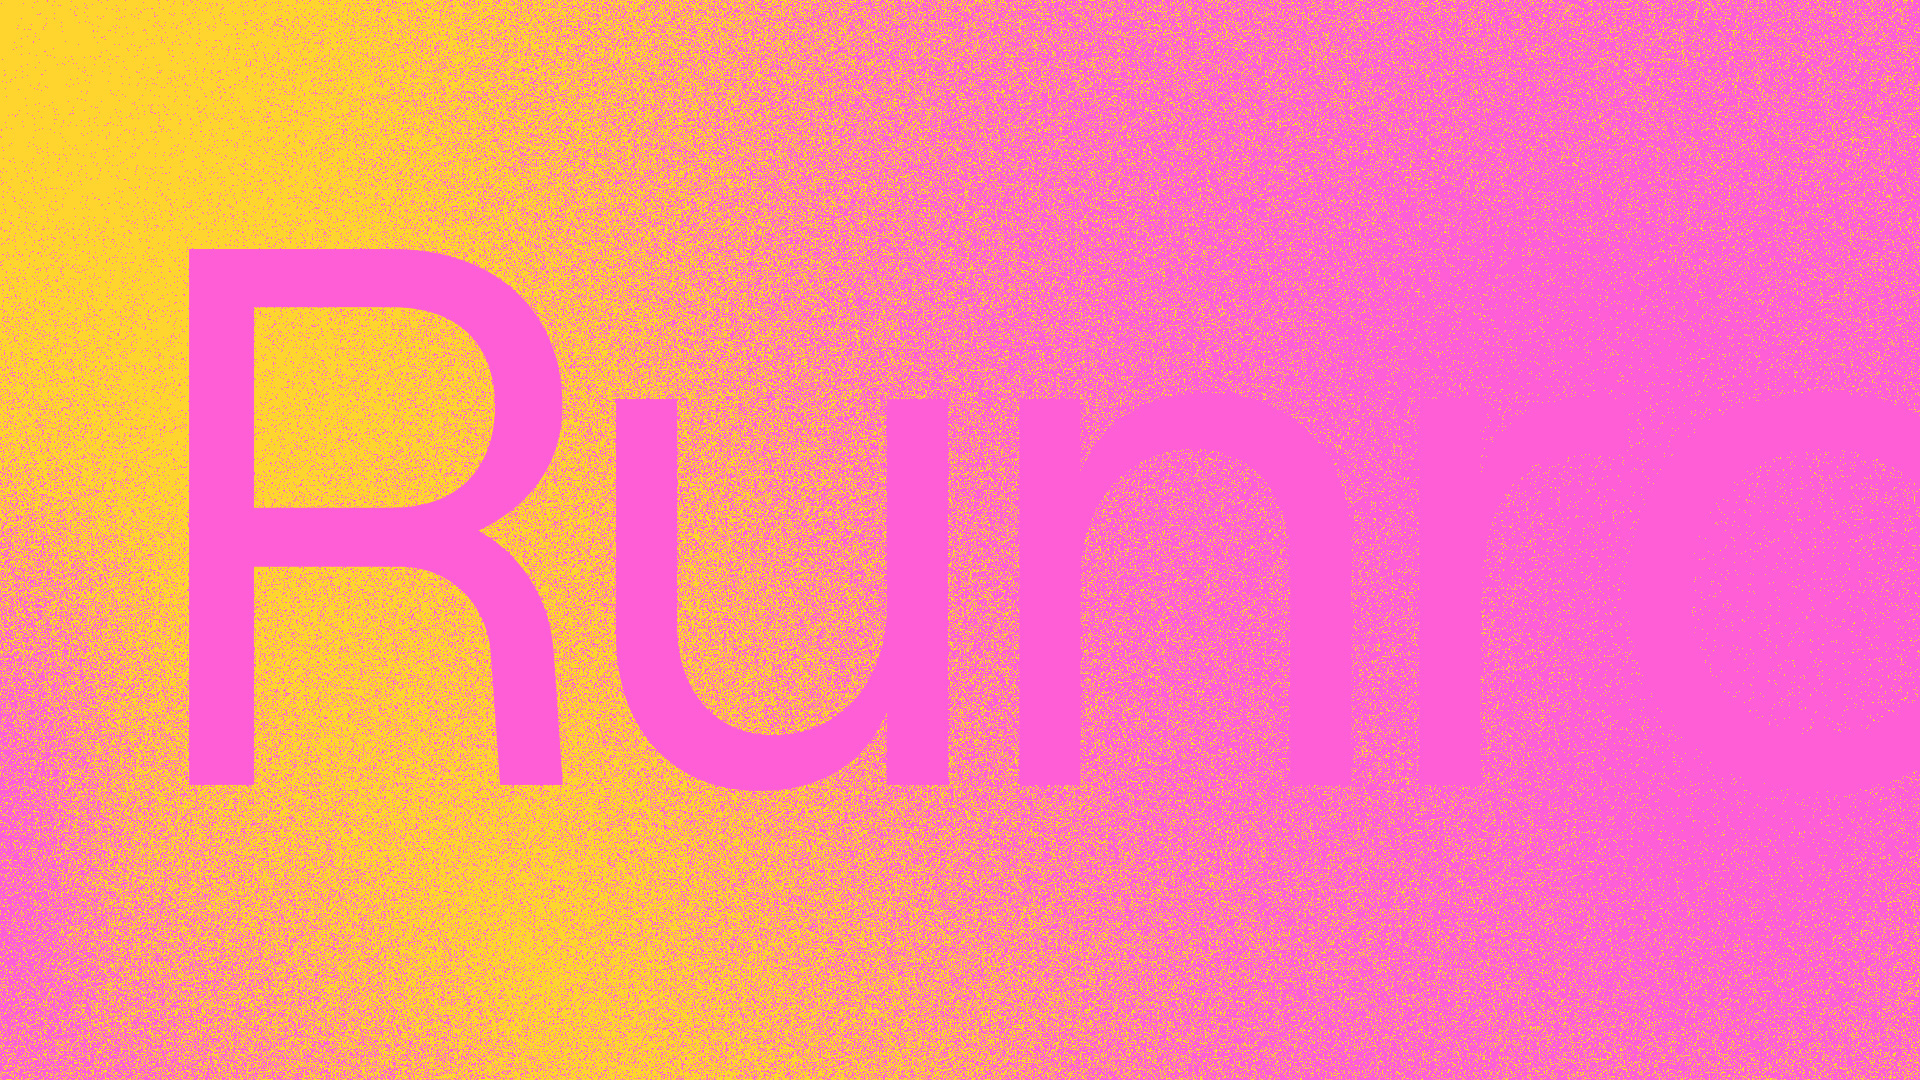 New propositions for Runroom